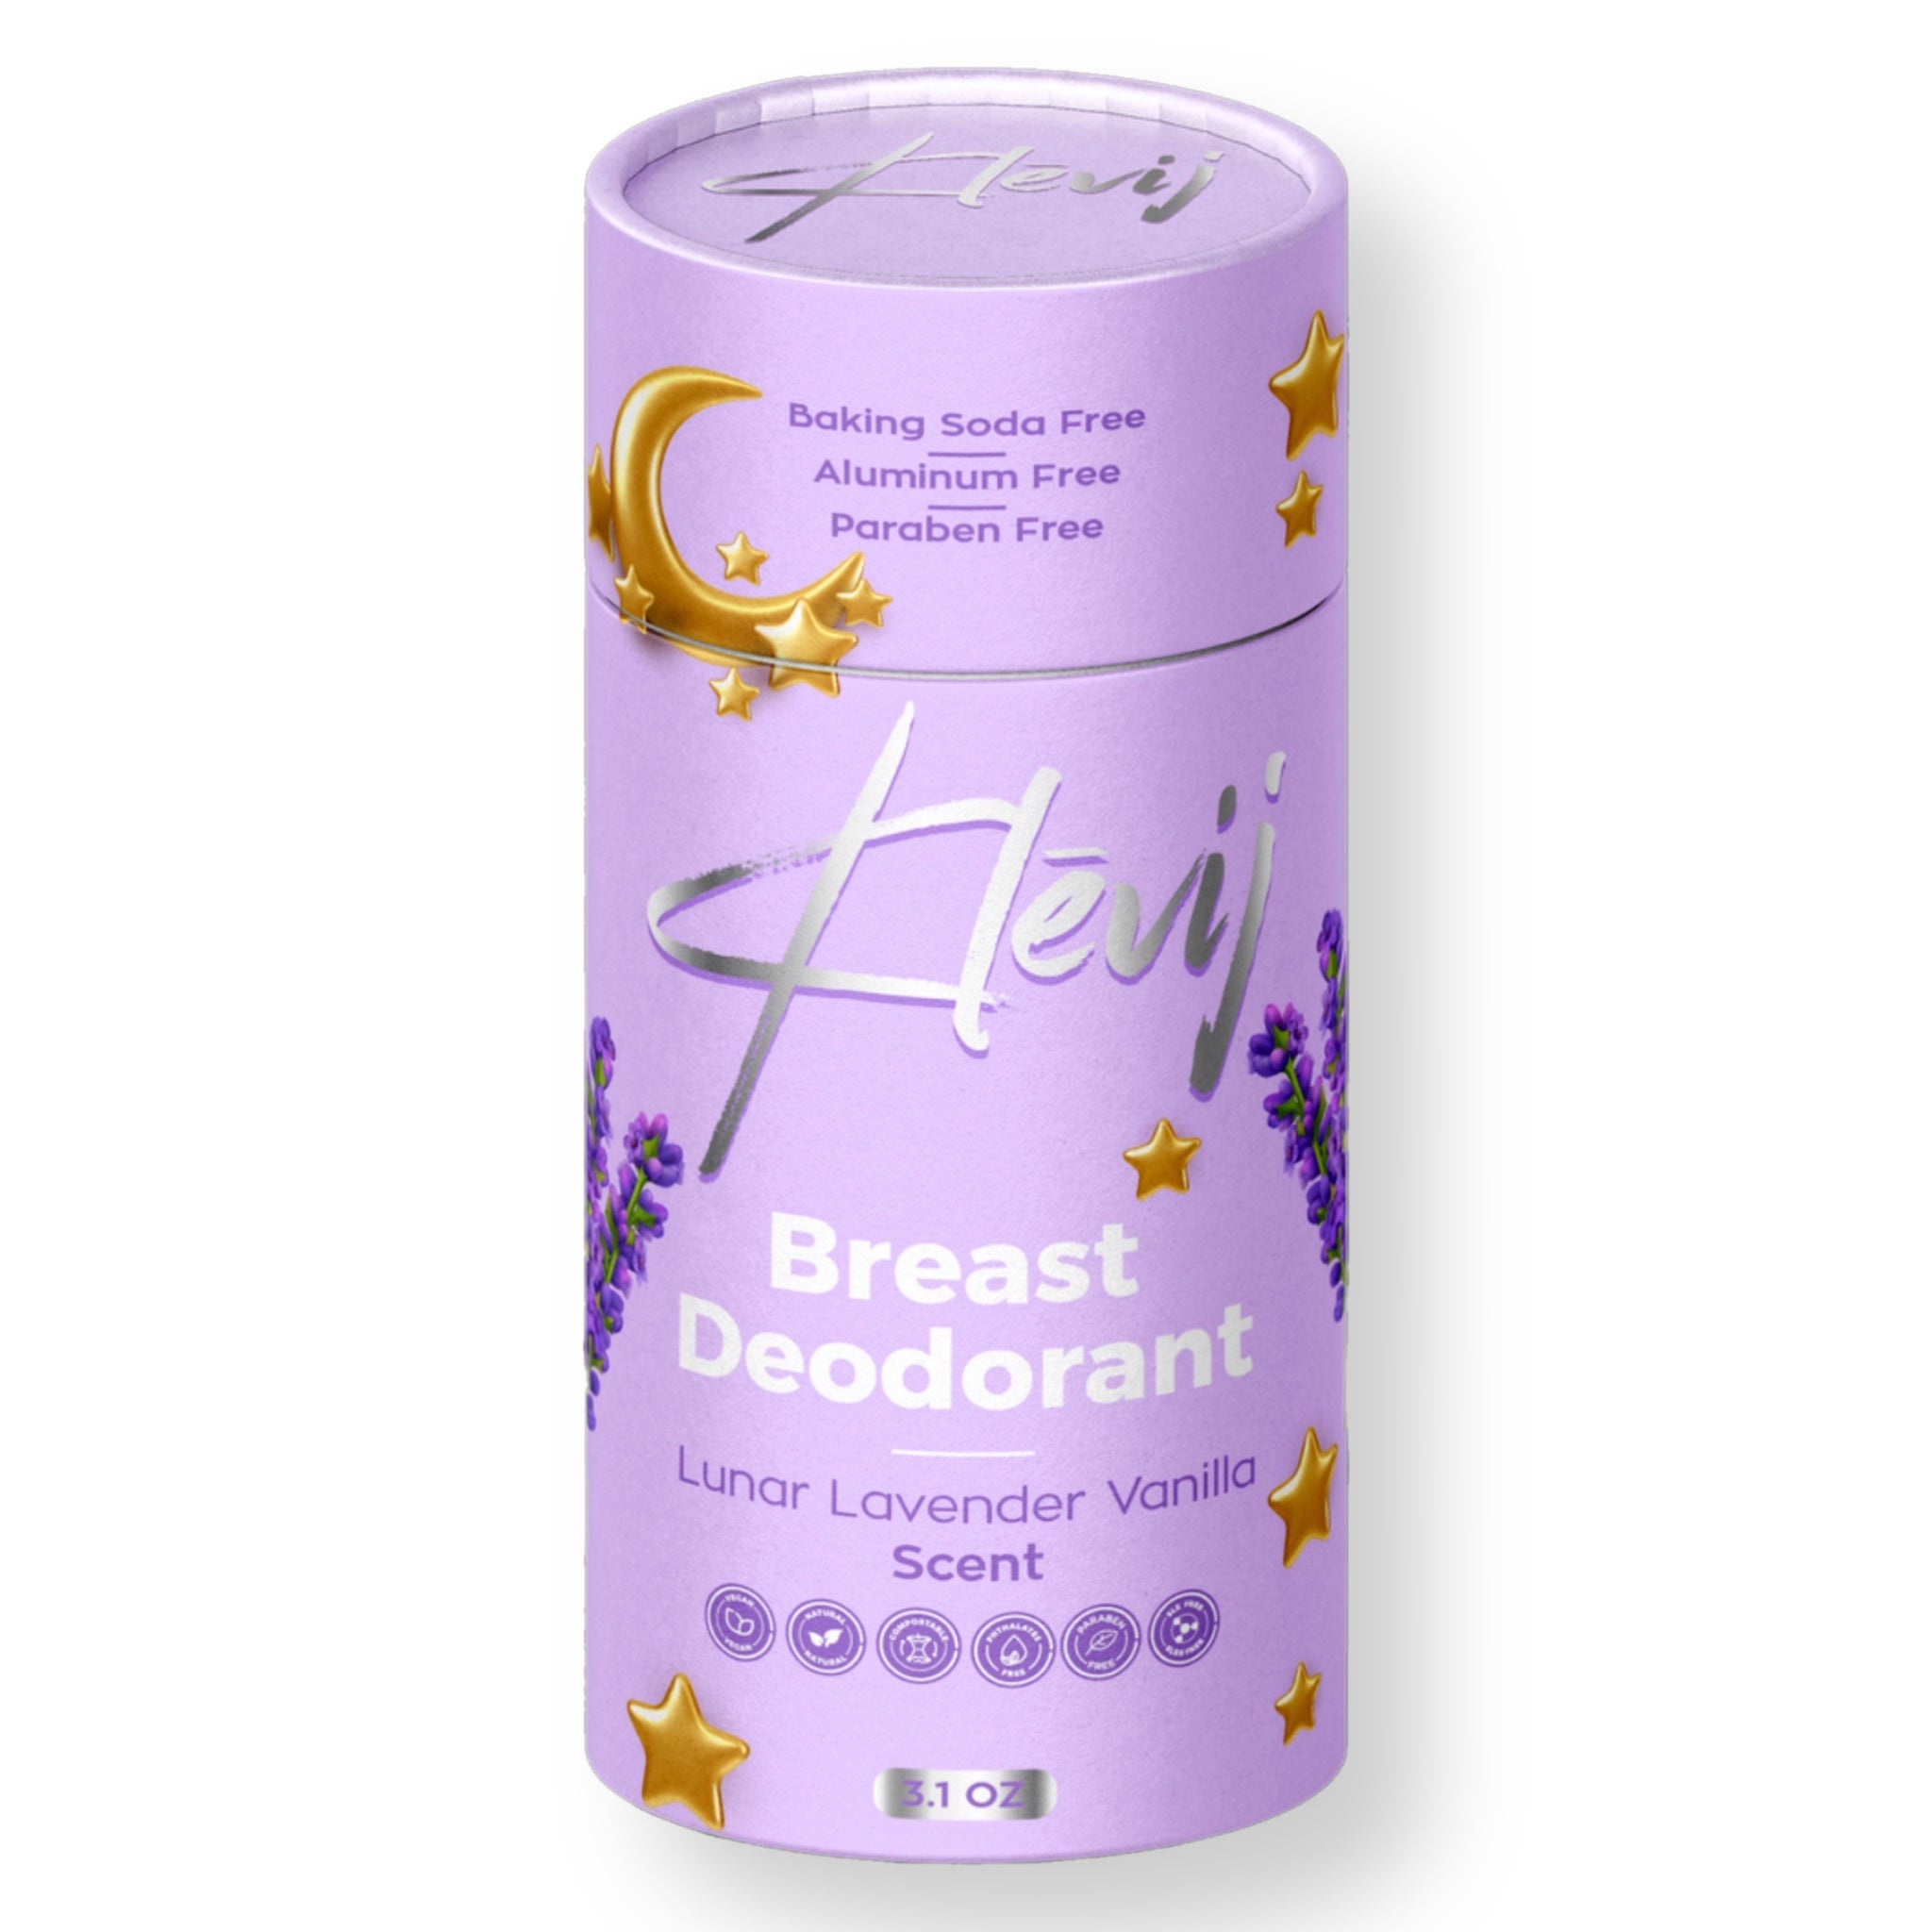 Breast Deodorant by Klevij | 3.1 oz Lunar Lavender Vanilla Scented  | Fresh, Chemical-Free Protection